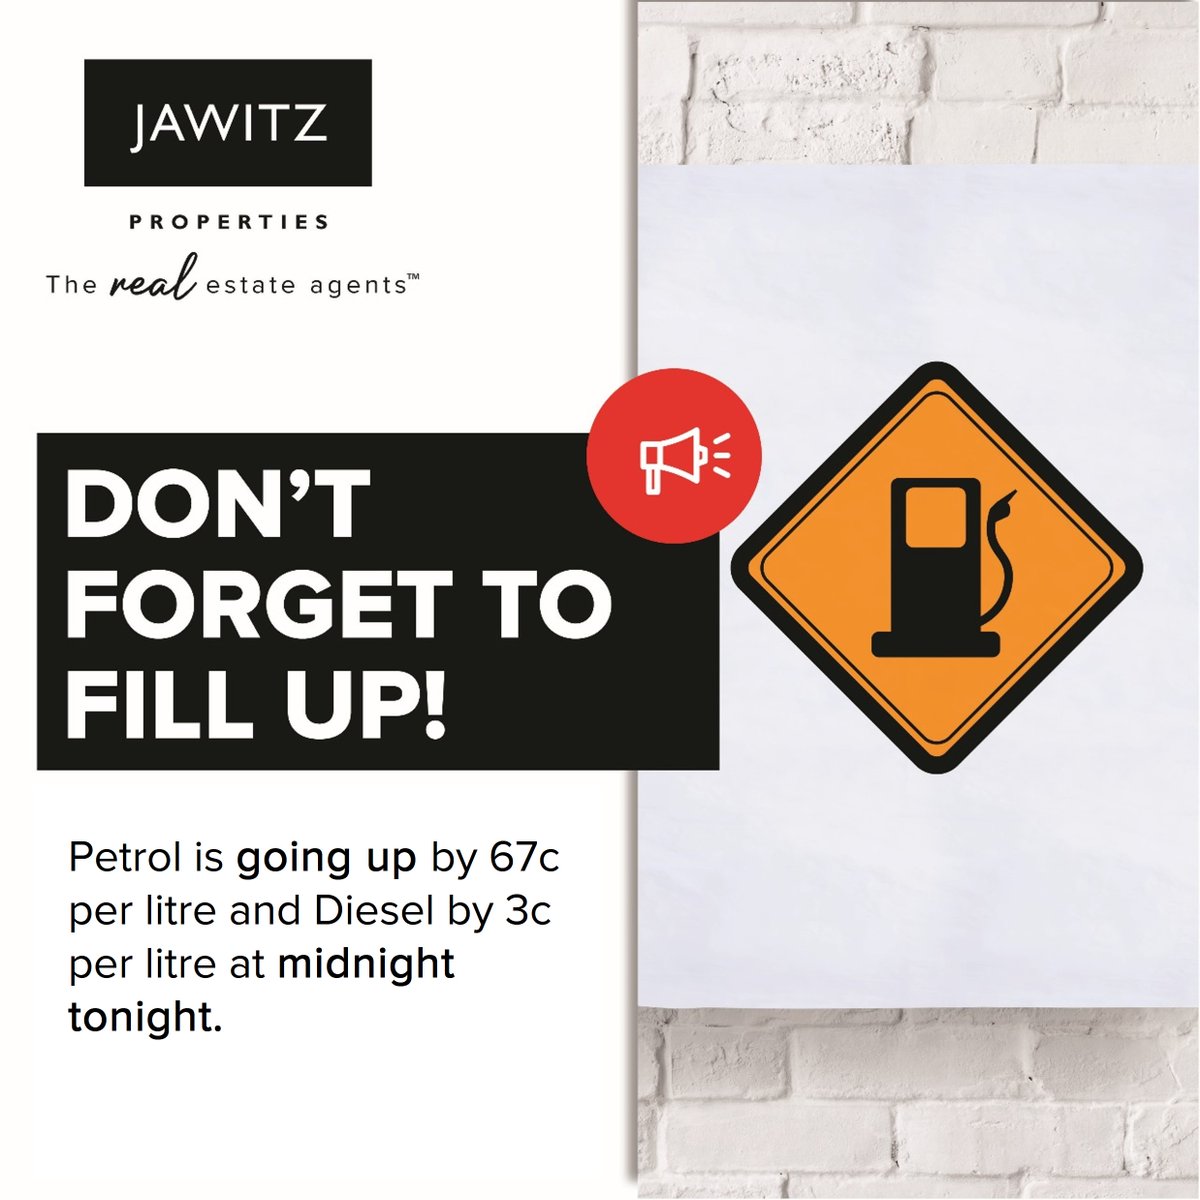 🚨 PETROL PRICE UPDATE 🗓 Wednesday, 3 April ⛽ Petrol prices are set to increase by 67c per litre, and diesel to increase by 3c per litre at midnight tonight 🚗🚙 The 𝑟𝑒𝑎𝑙 estate agents™ #Jawitz #PetrolPriceHike #PetrolPriceUpdate #PetrolDieselPrice